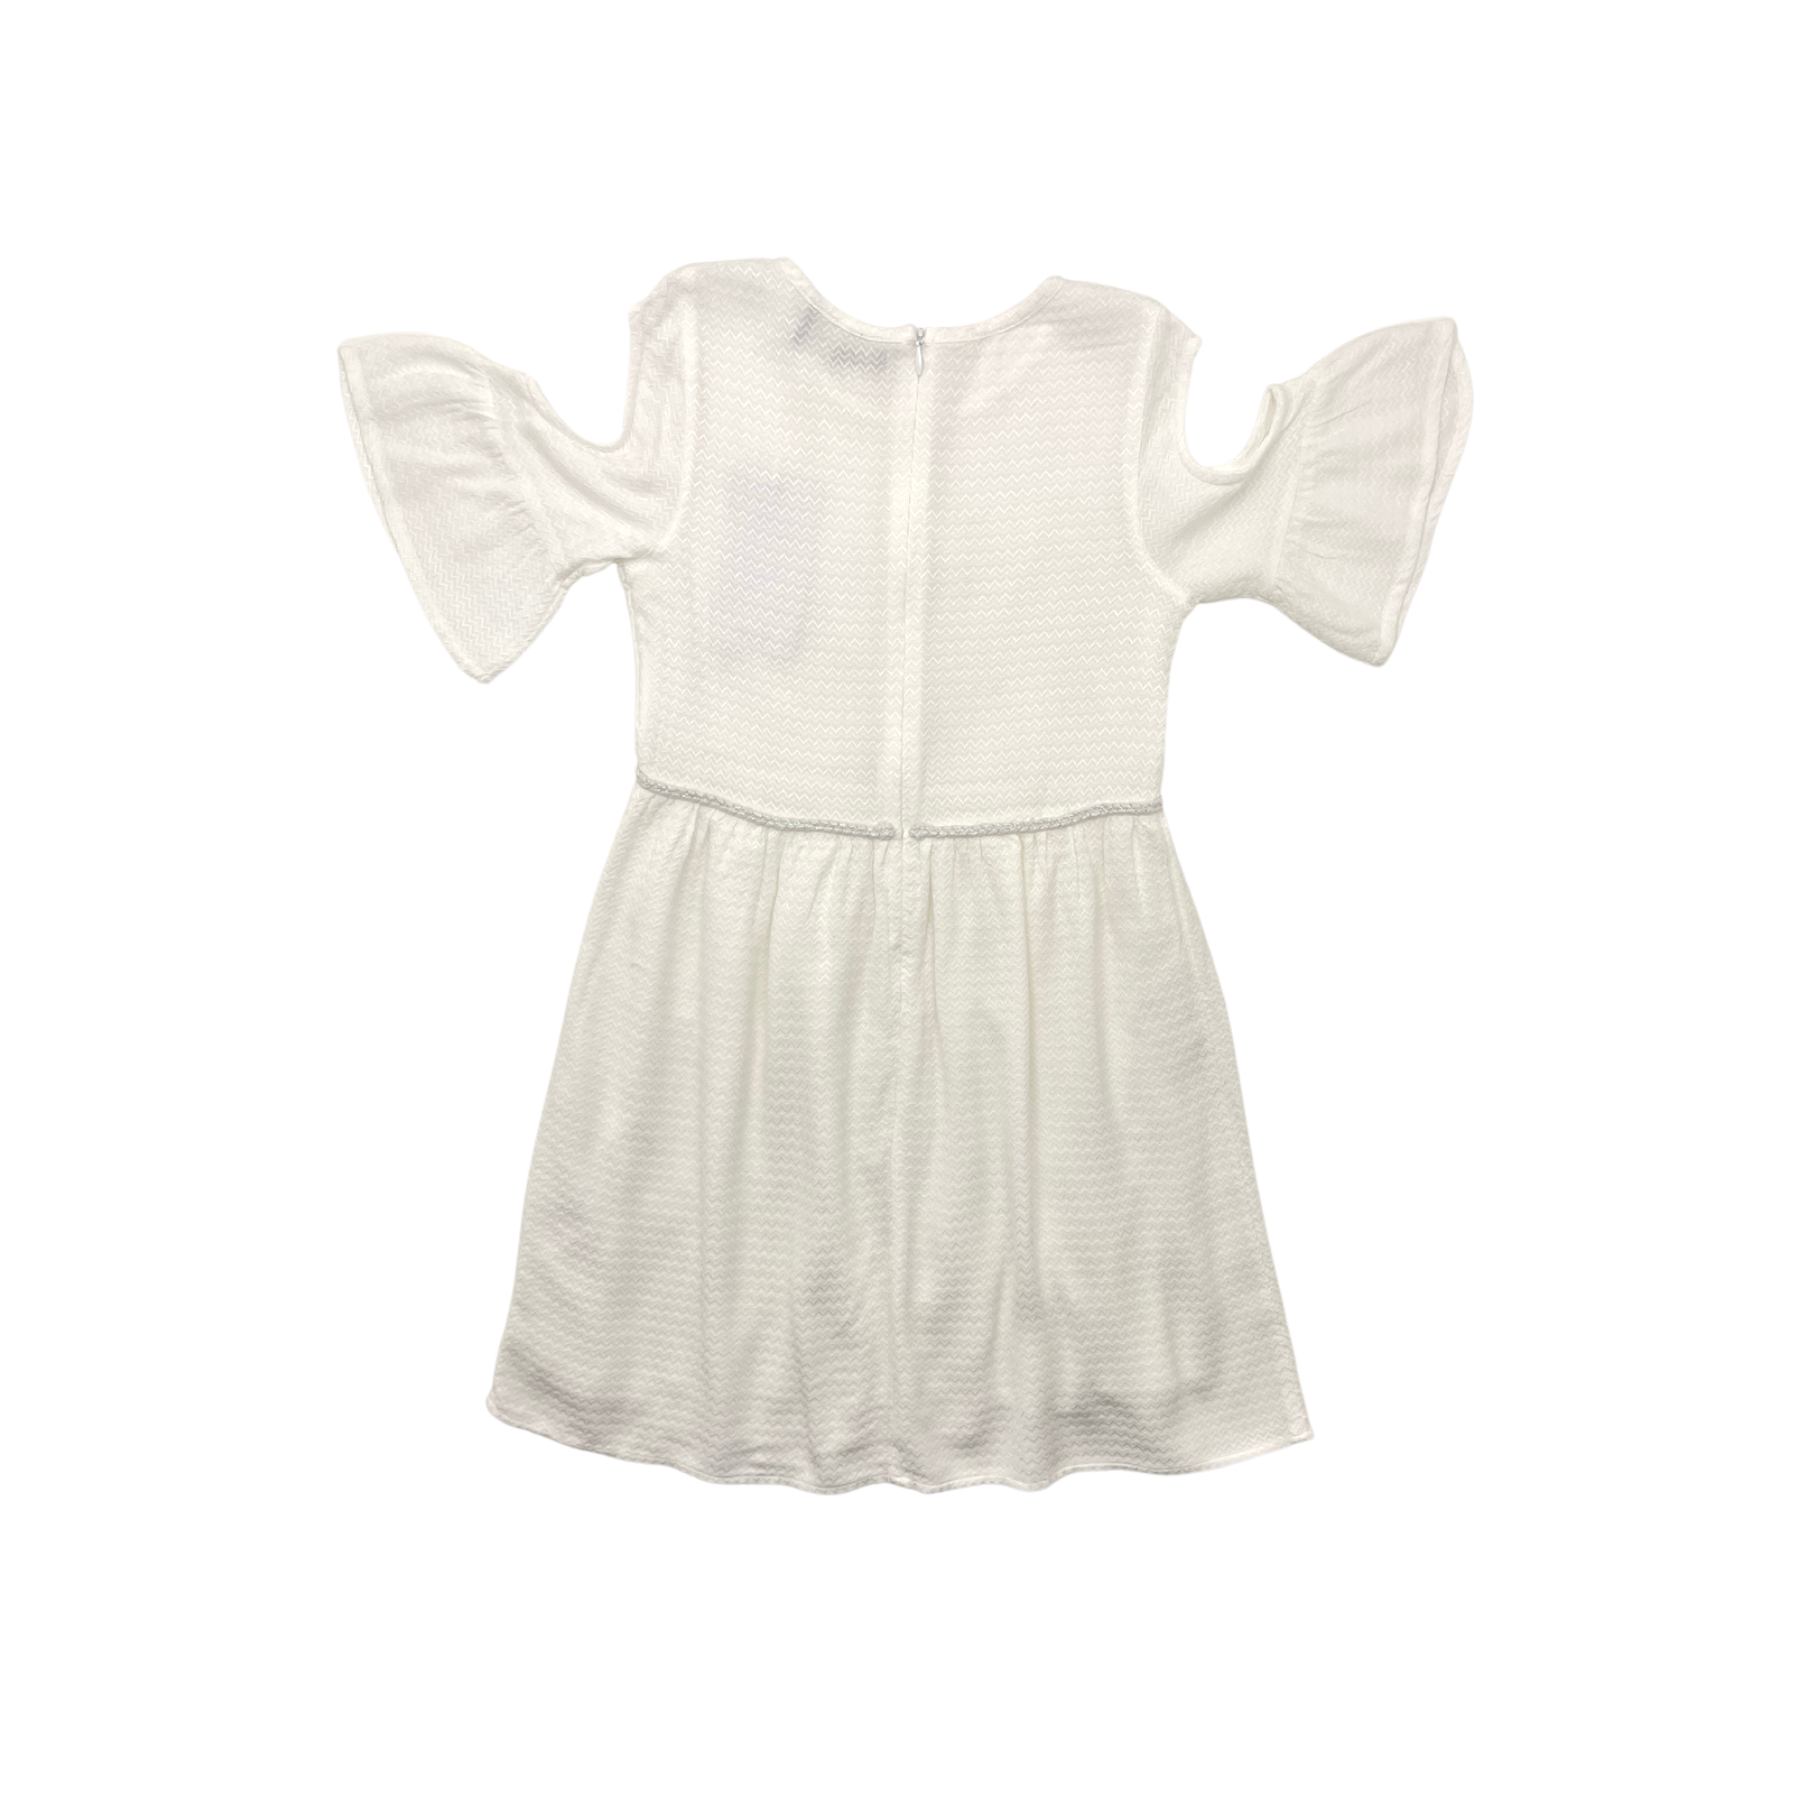 IKKS - White dress with bare shoulders - 6 years old